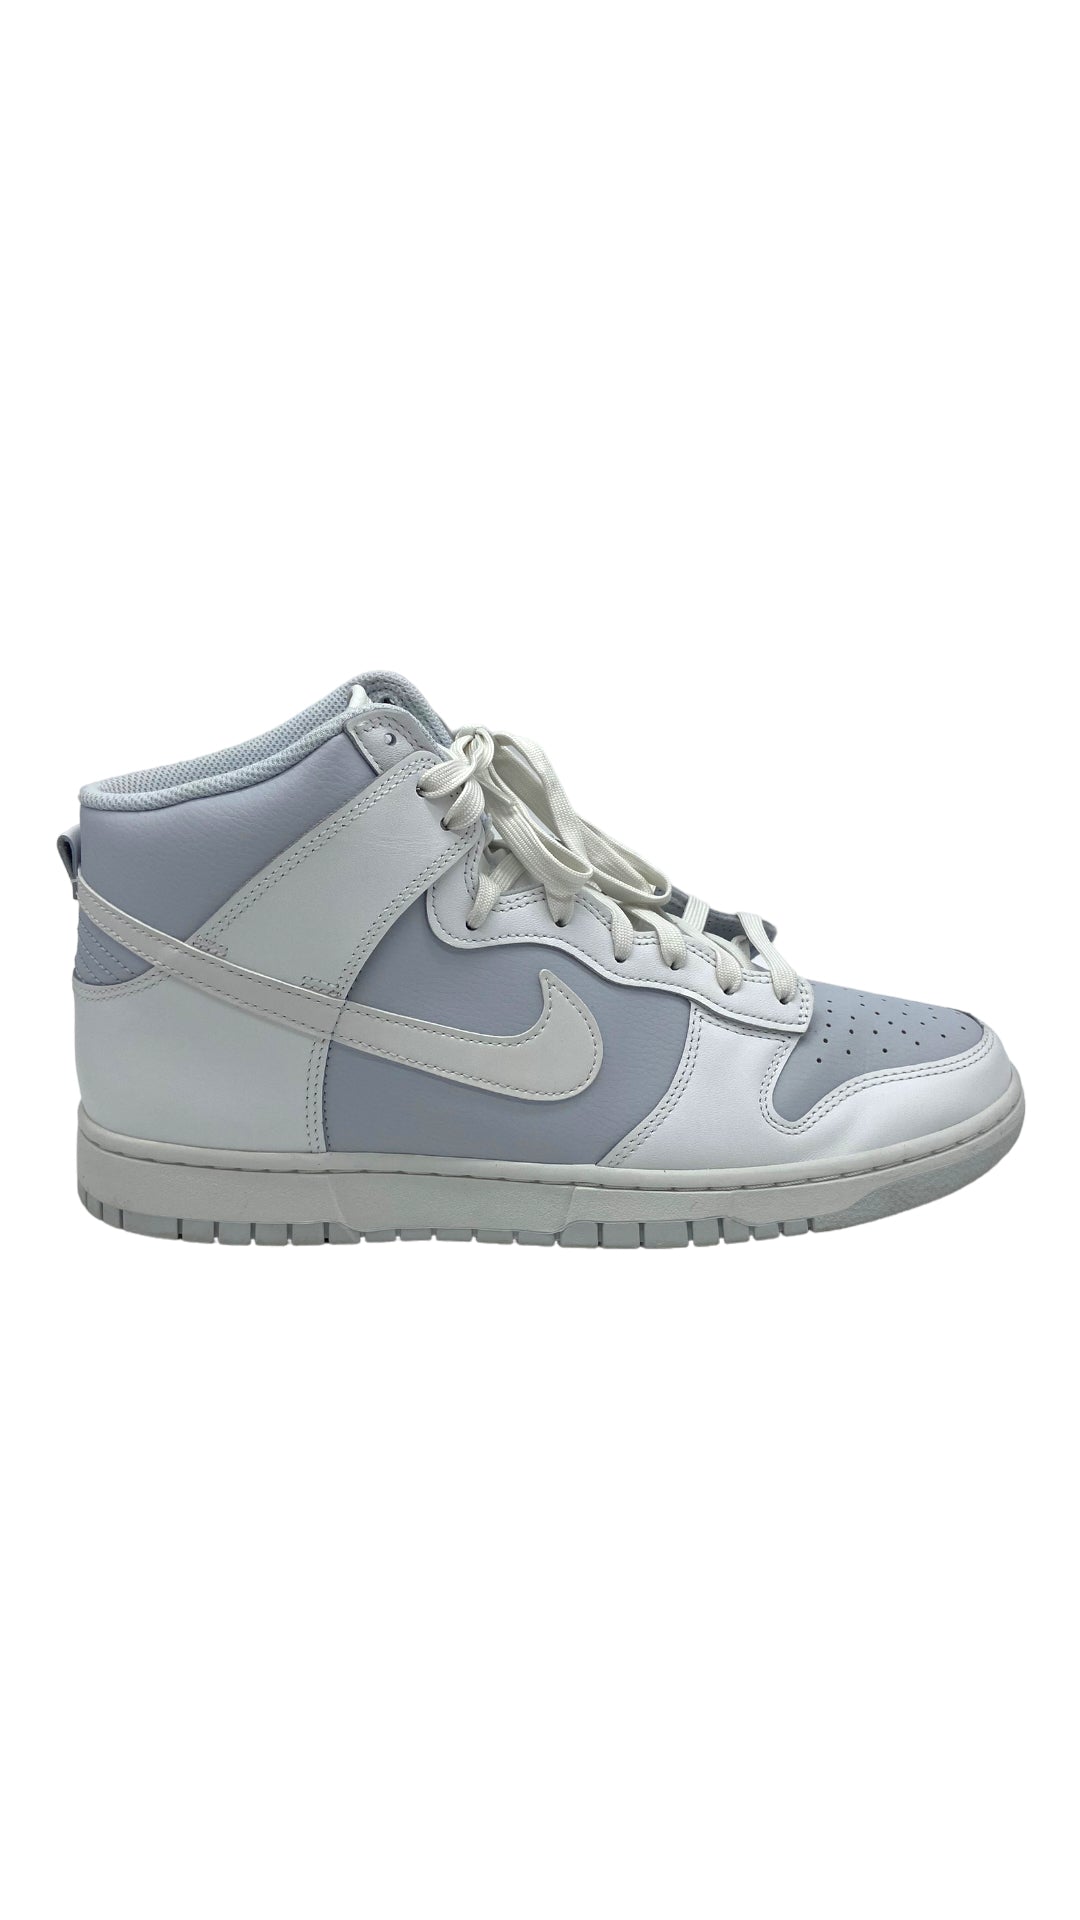 Load image into Gallery viewer, Preowned Nike Dunk High Summit White Pure Platinum Sz 12.5
